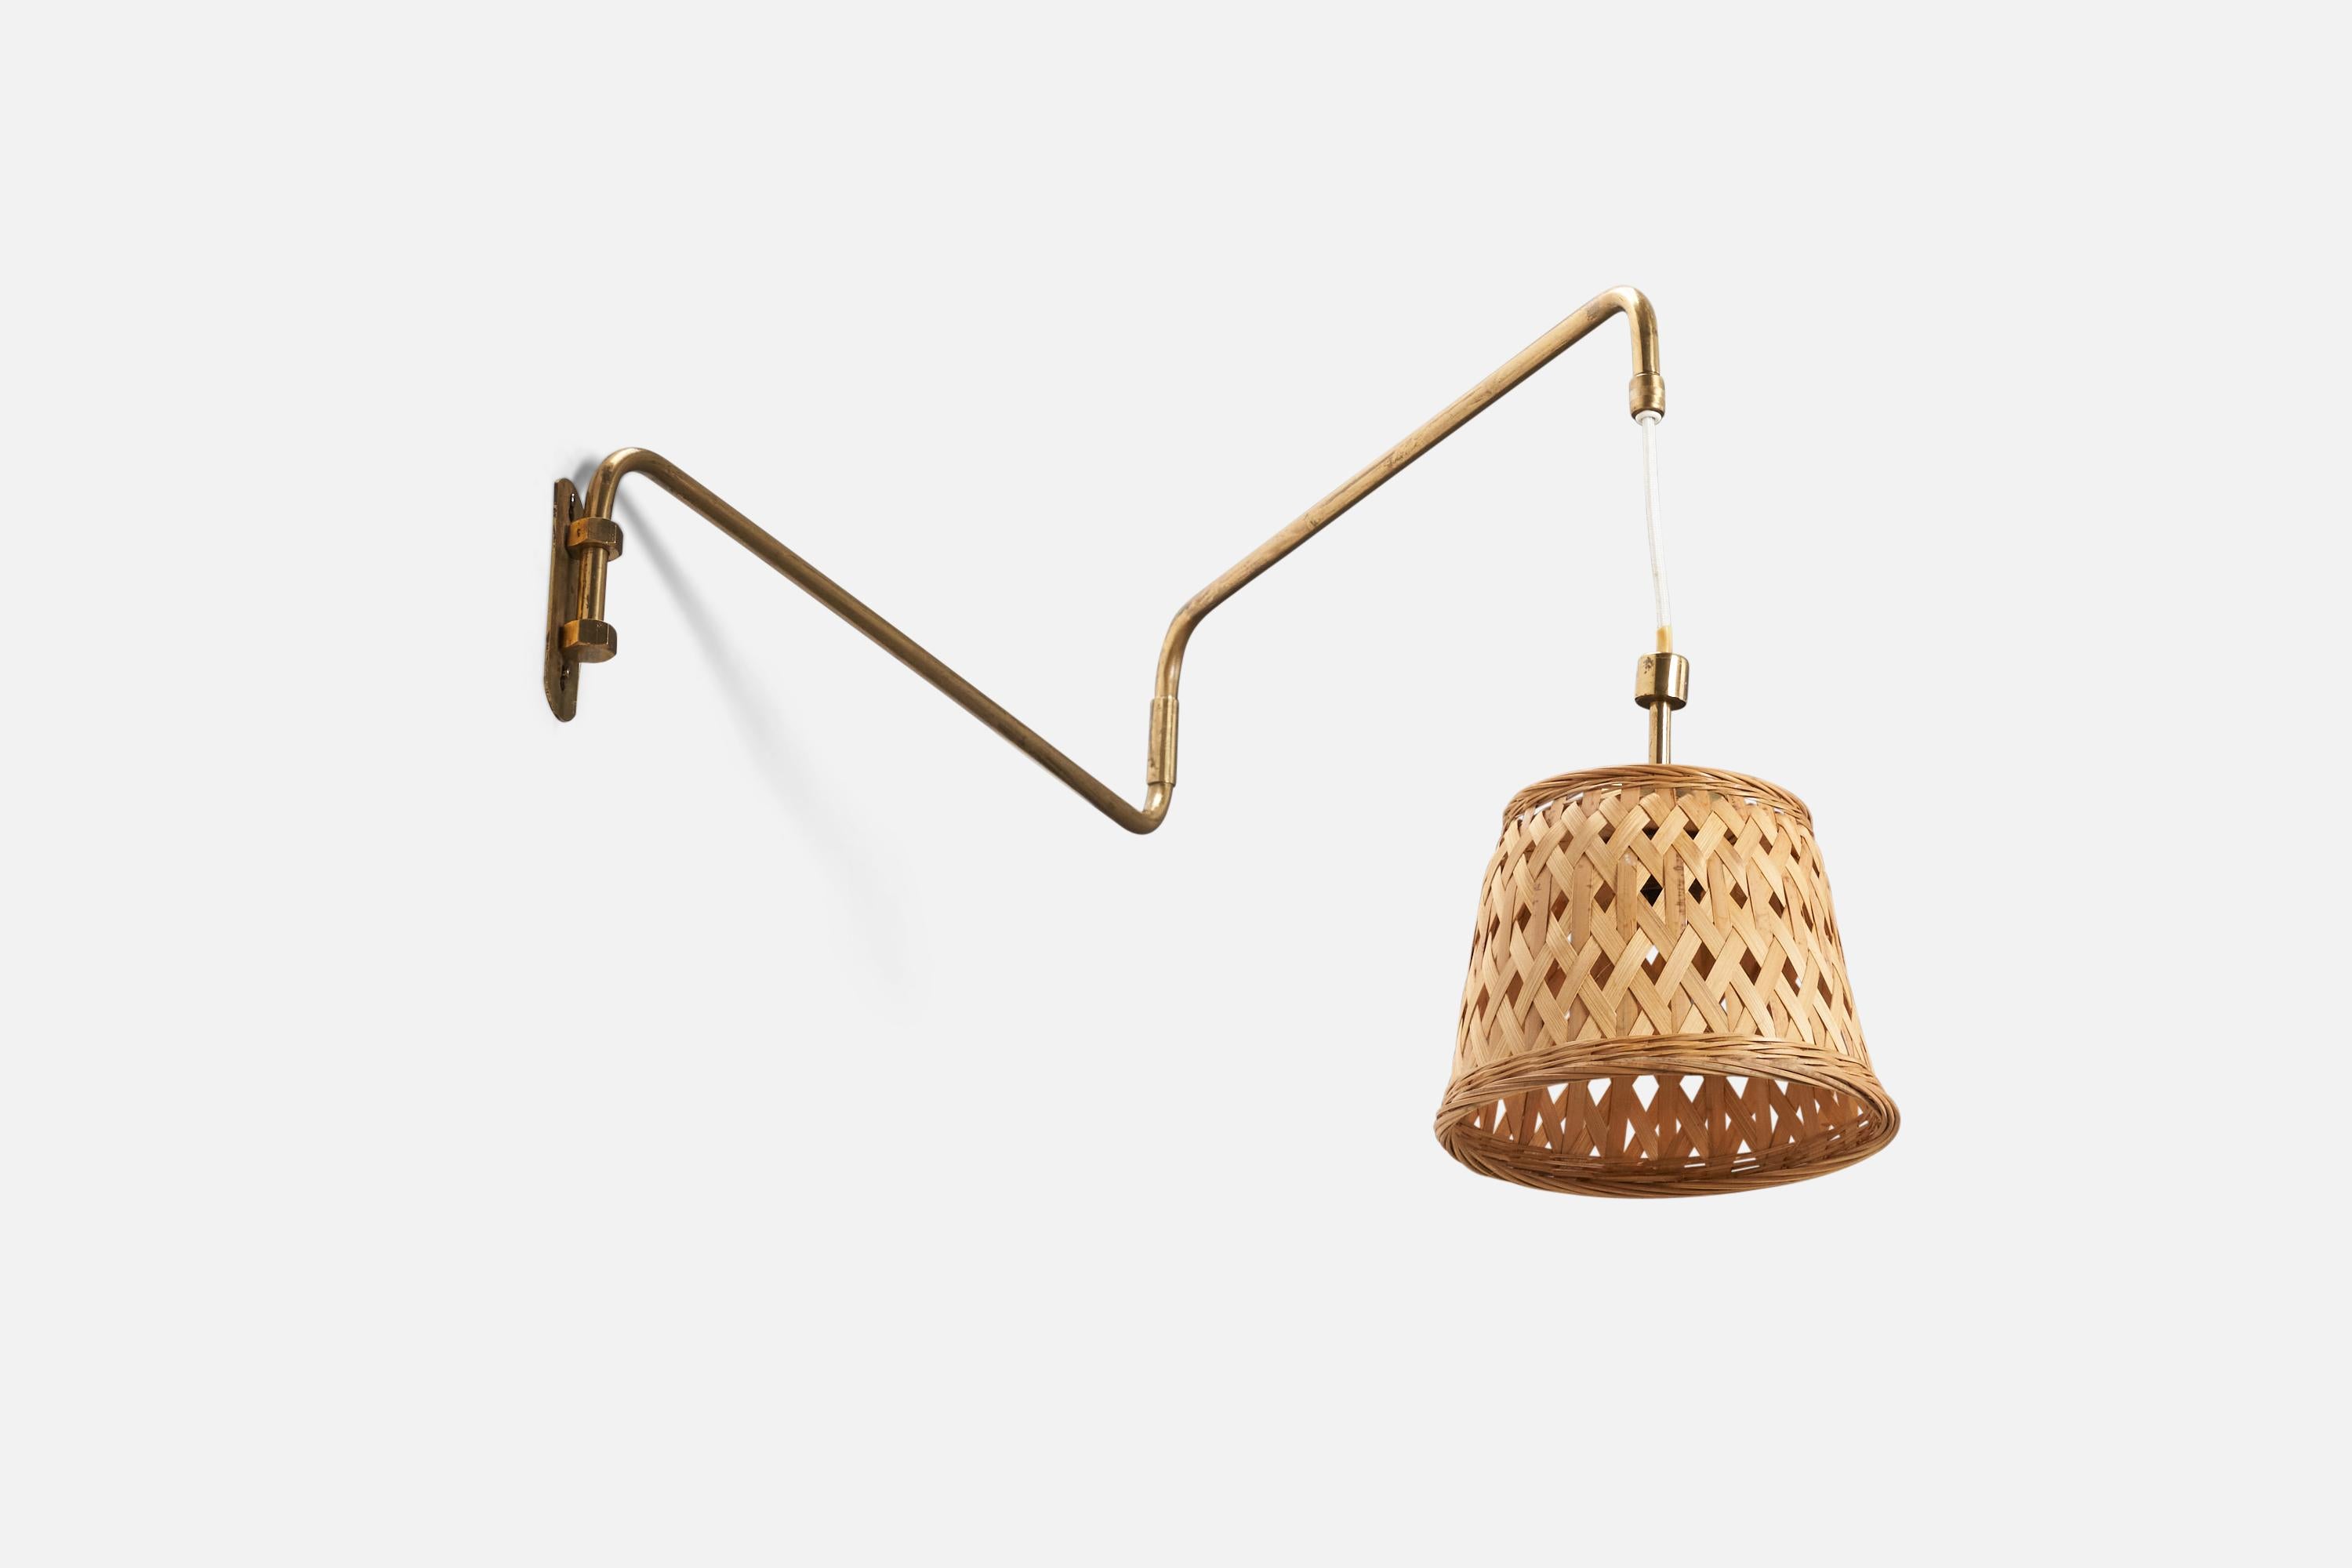 A brass and rattan wall light designed and produced by a Swedish Designer, Sweden, 1940s.

Dimensions variable, measurements listed are of sconce in its maximum extended position. 

Socket takes standard E-26 medium base bulb.

There is no